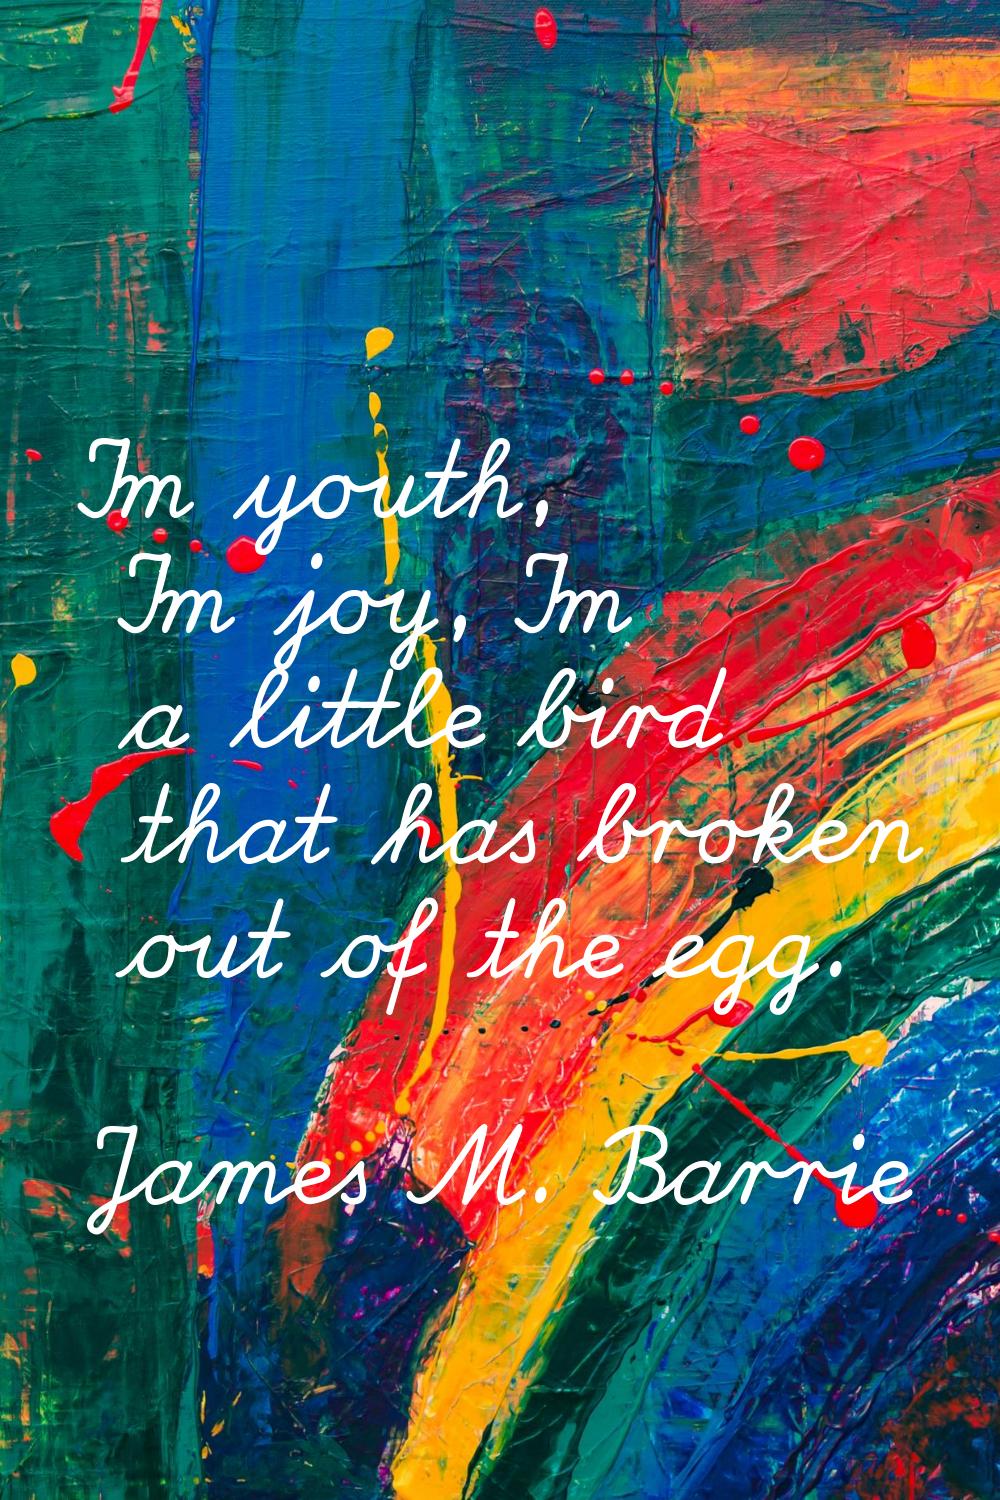 I'm youth, I'm joy, I'm a little bird that has broken out of the egg.